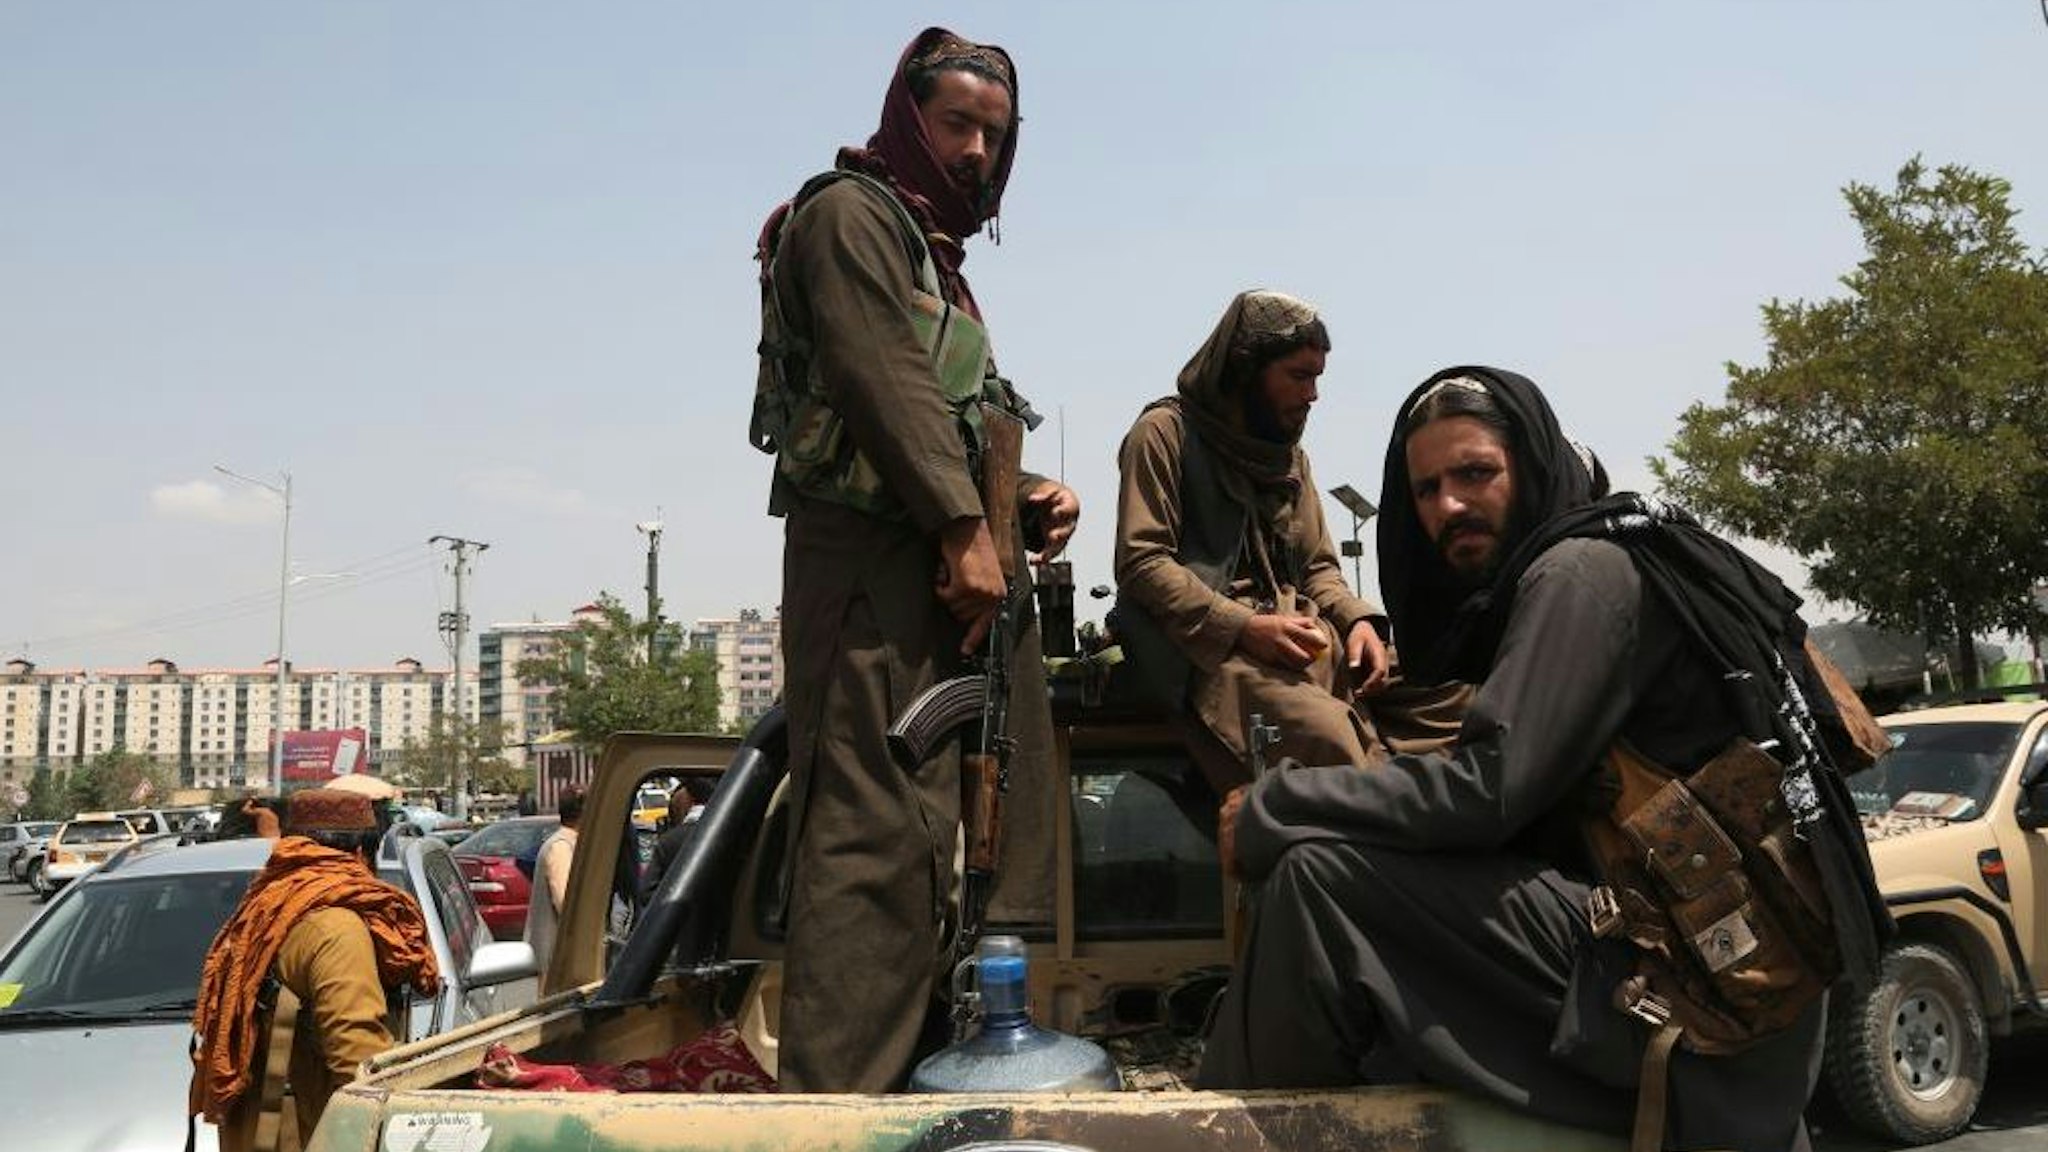 Taliban fighters are seen on a military vehicle in Kabul, capital of Afghanistan, Aug. 17, 2021. Normality has returned to Kabul, capital of Afghanistan as the Taliban on Tuesday urged the government employees to return to work, two days after the group took control of the capital. Declaring a general amnesty, the Taliban urged all to start routine life with confidence. It also urged women to join its government. Taliban spokesman Zabihullah Mujahid tweeted that the situation in Kabul was completely under control and law and order returned to the city.